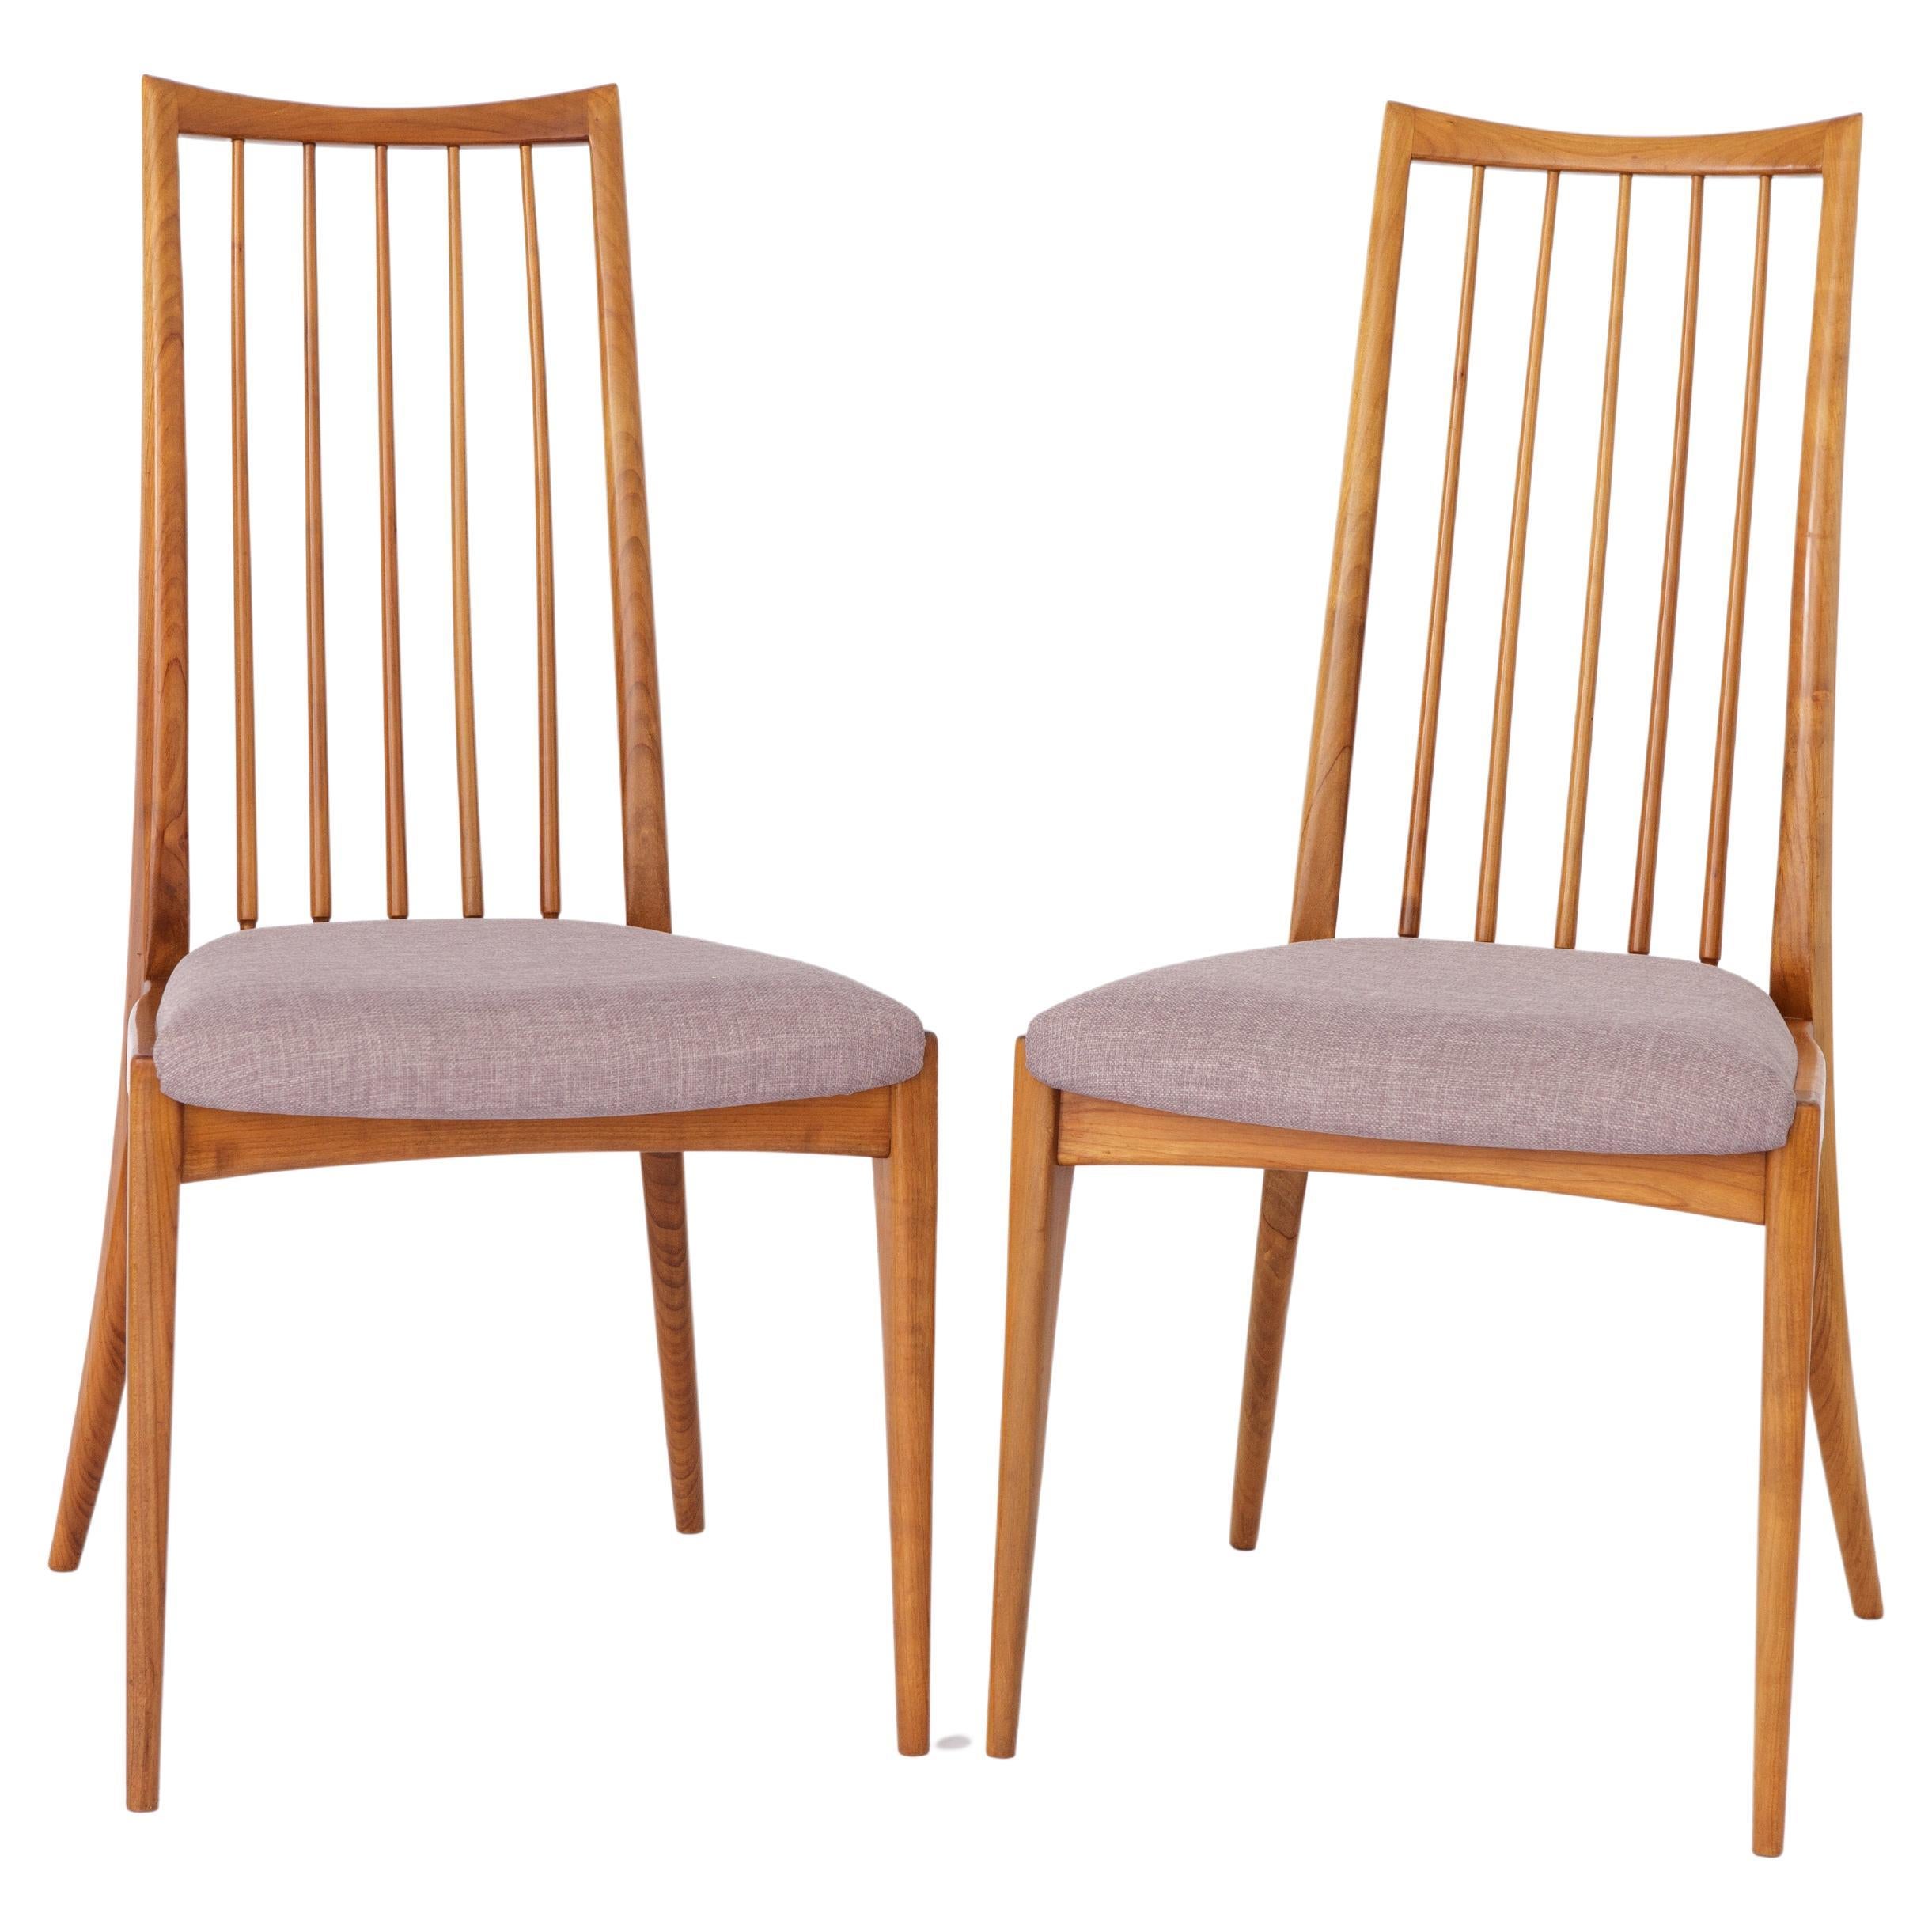 2 Vintage Chairs 1960s by Ernst Martin Dettinger, Germany For Sale